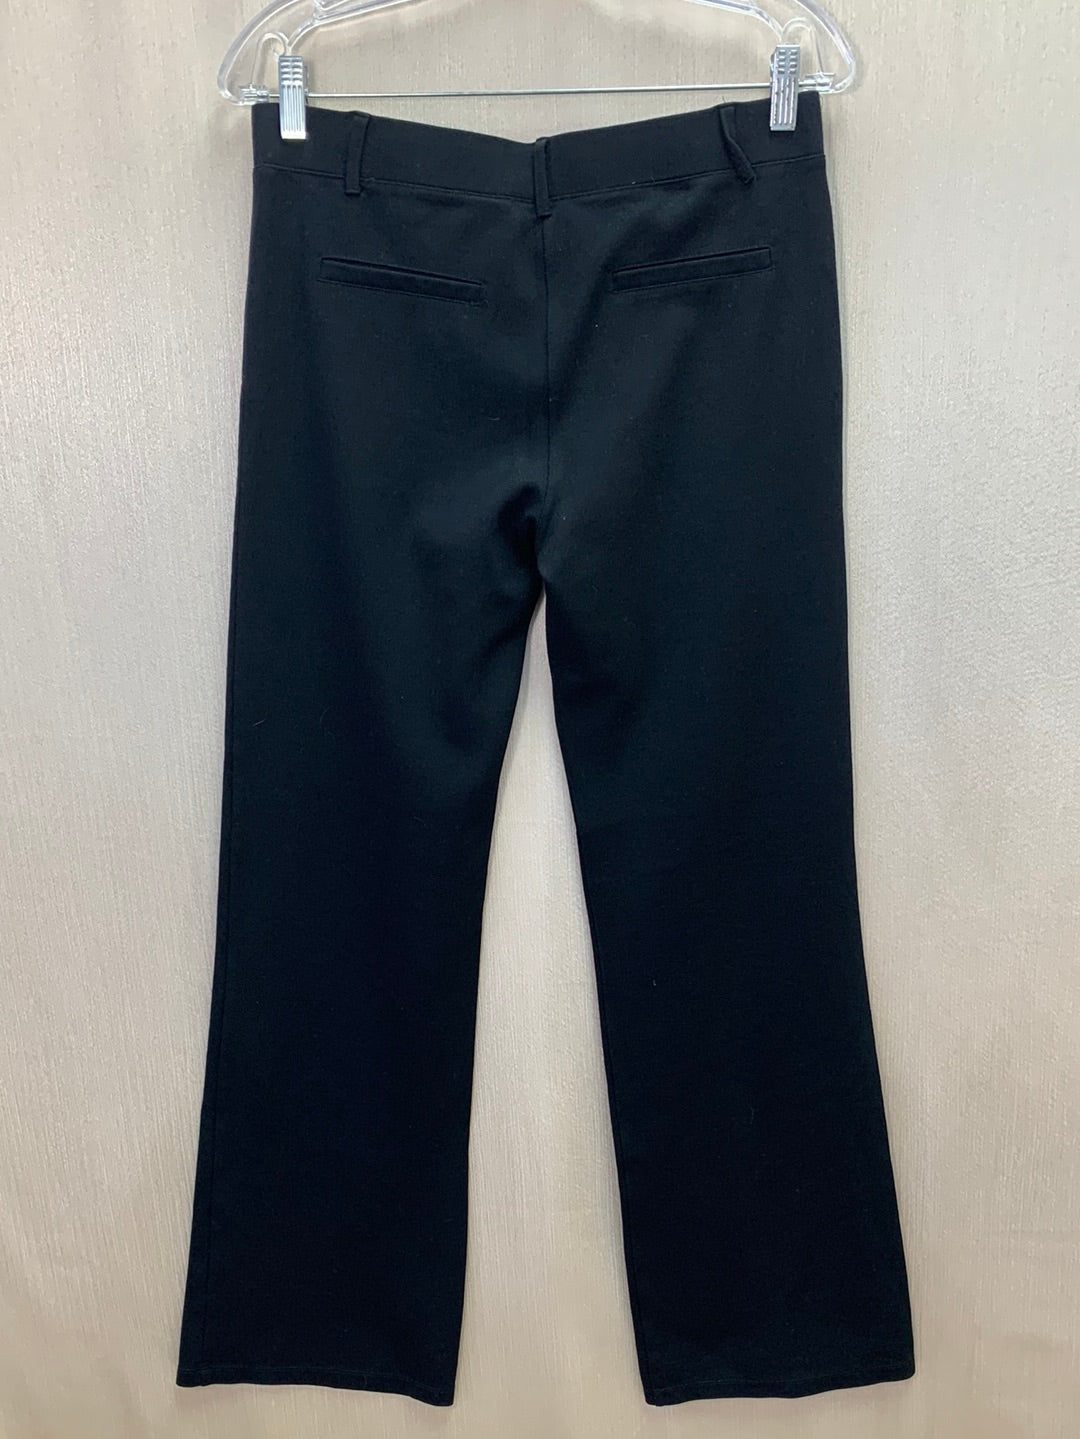 Betabrand Black Ponte Dress Pant Yoga Pants in Boot Cut Size Small Long